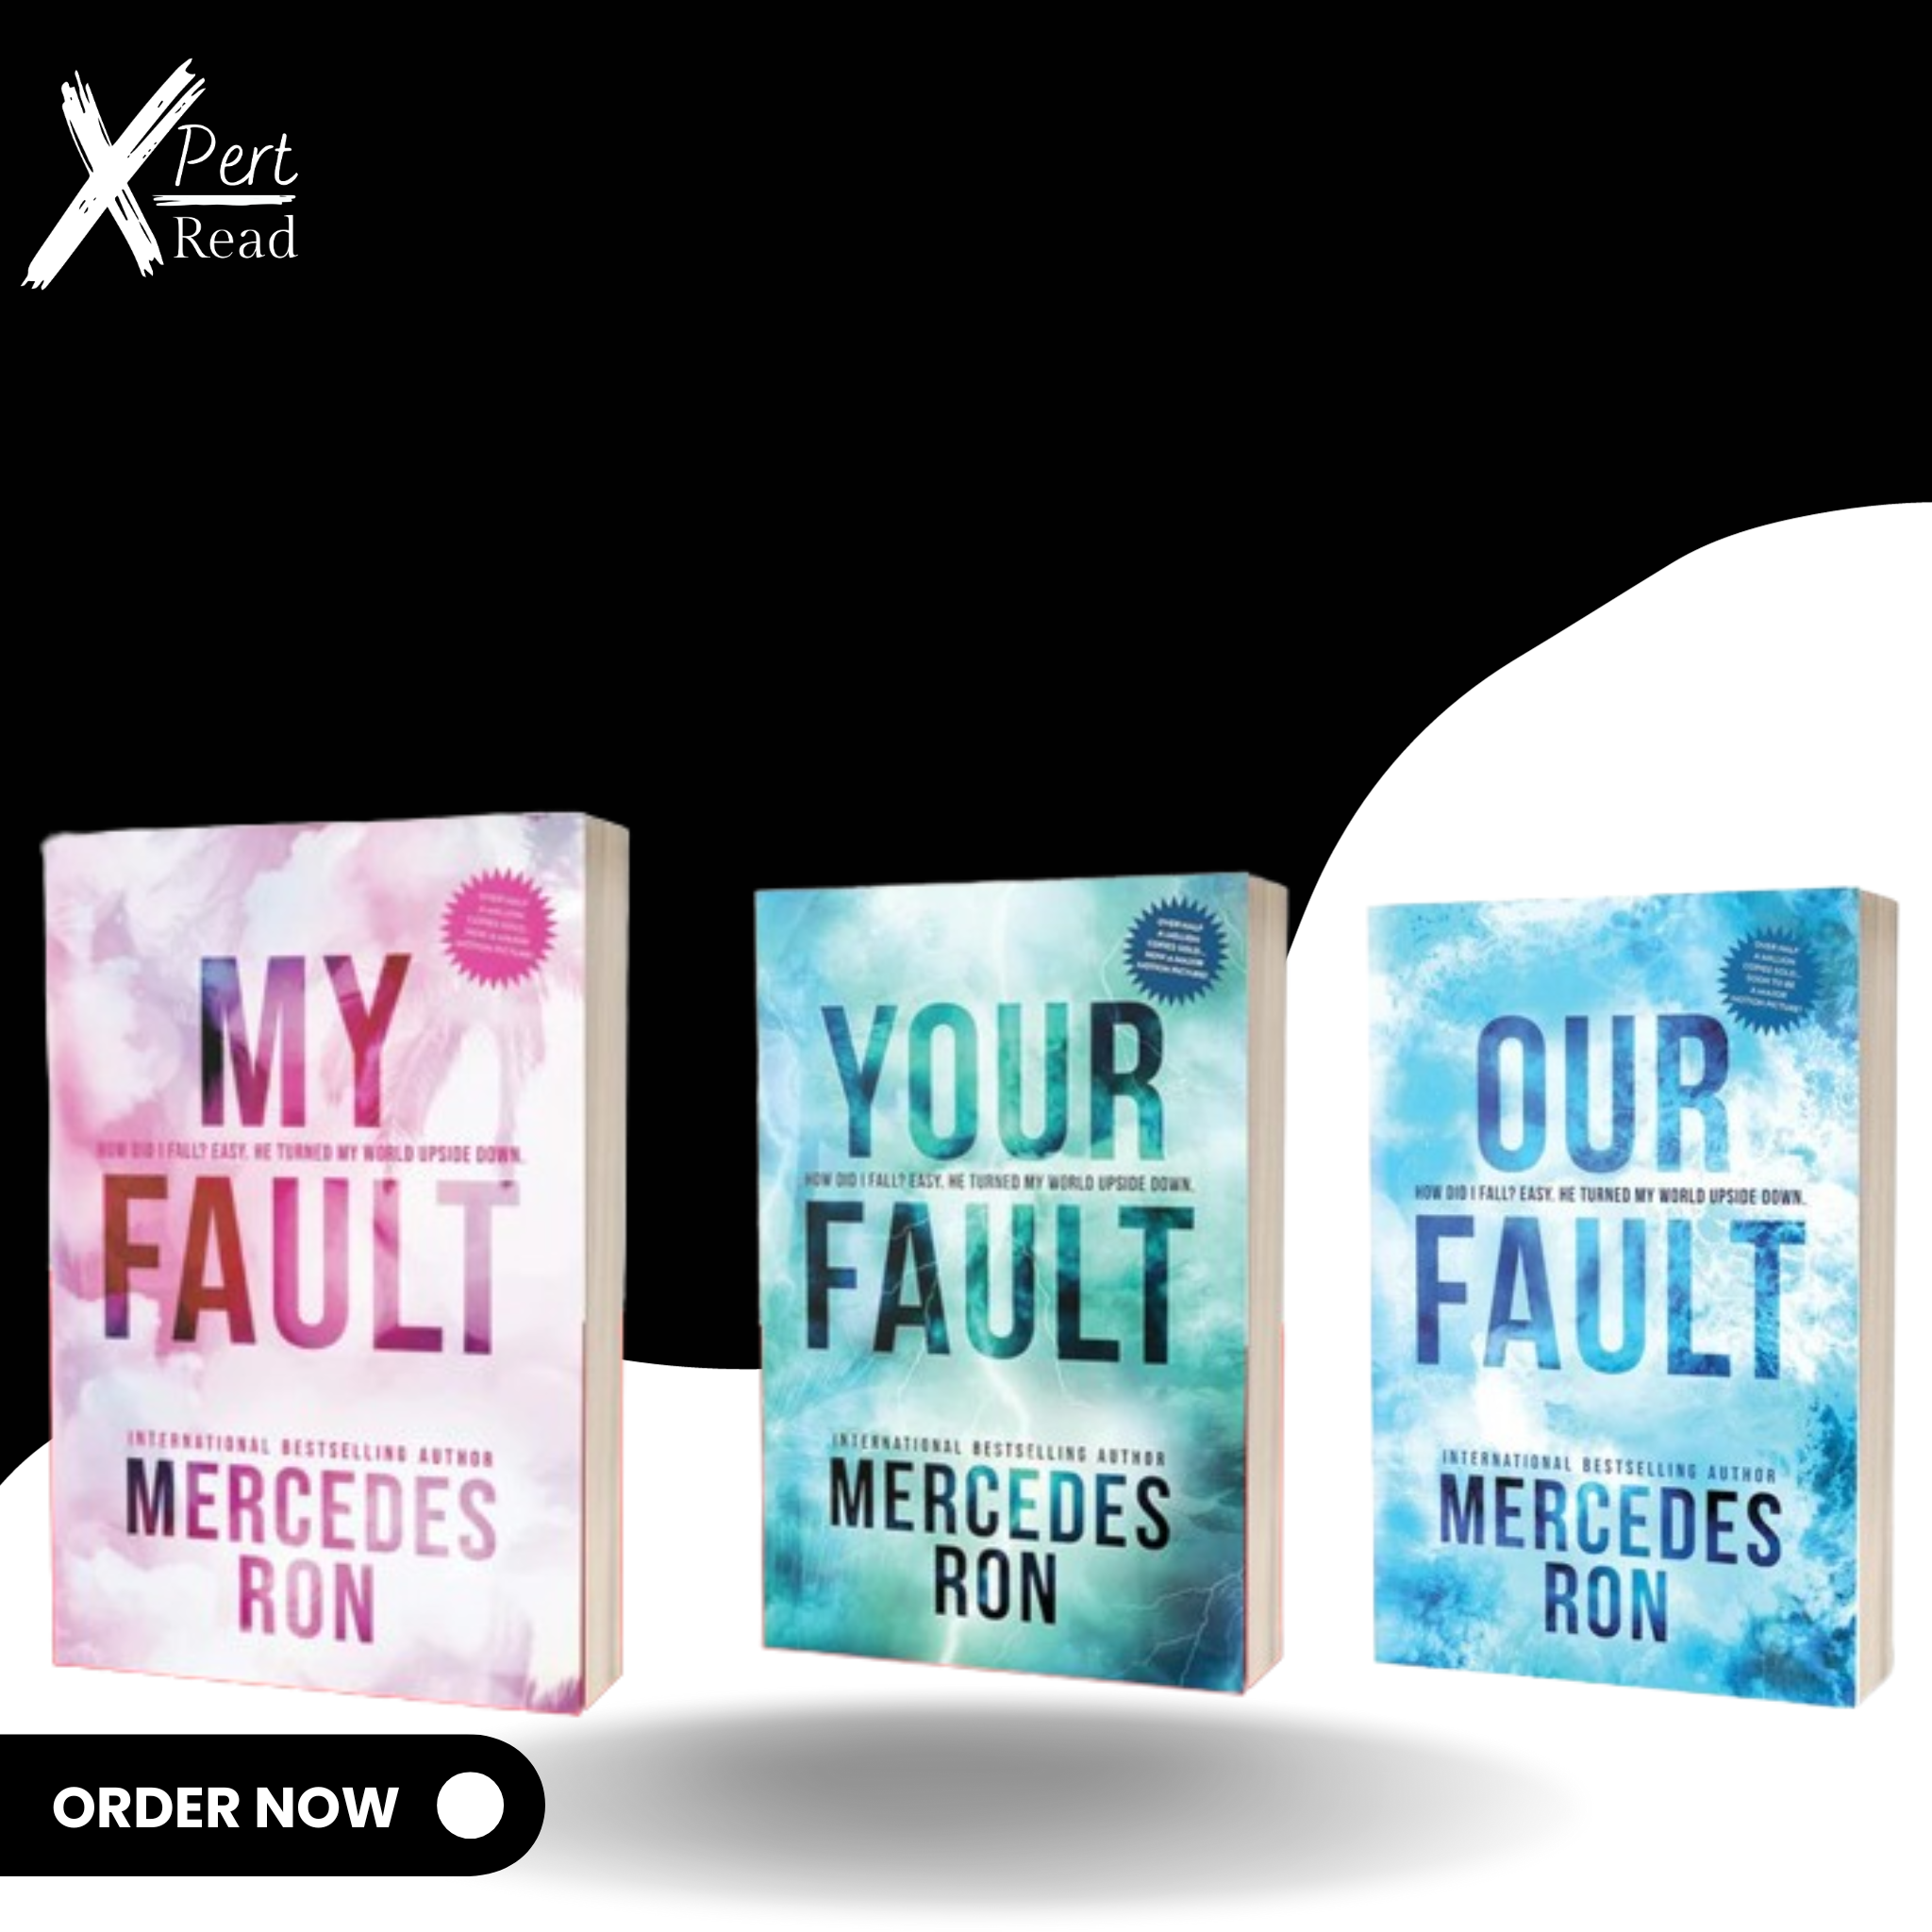 My Fault, Your Fault, Our Fault By MERCEDES RON (3 Books)